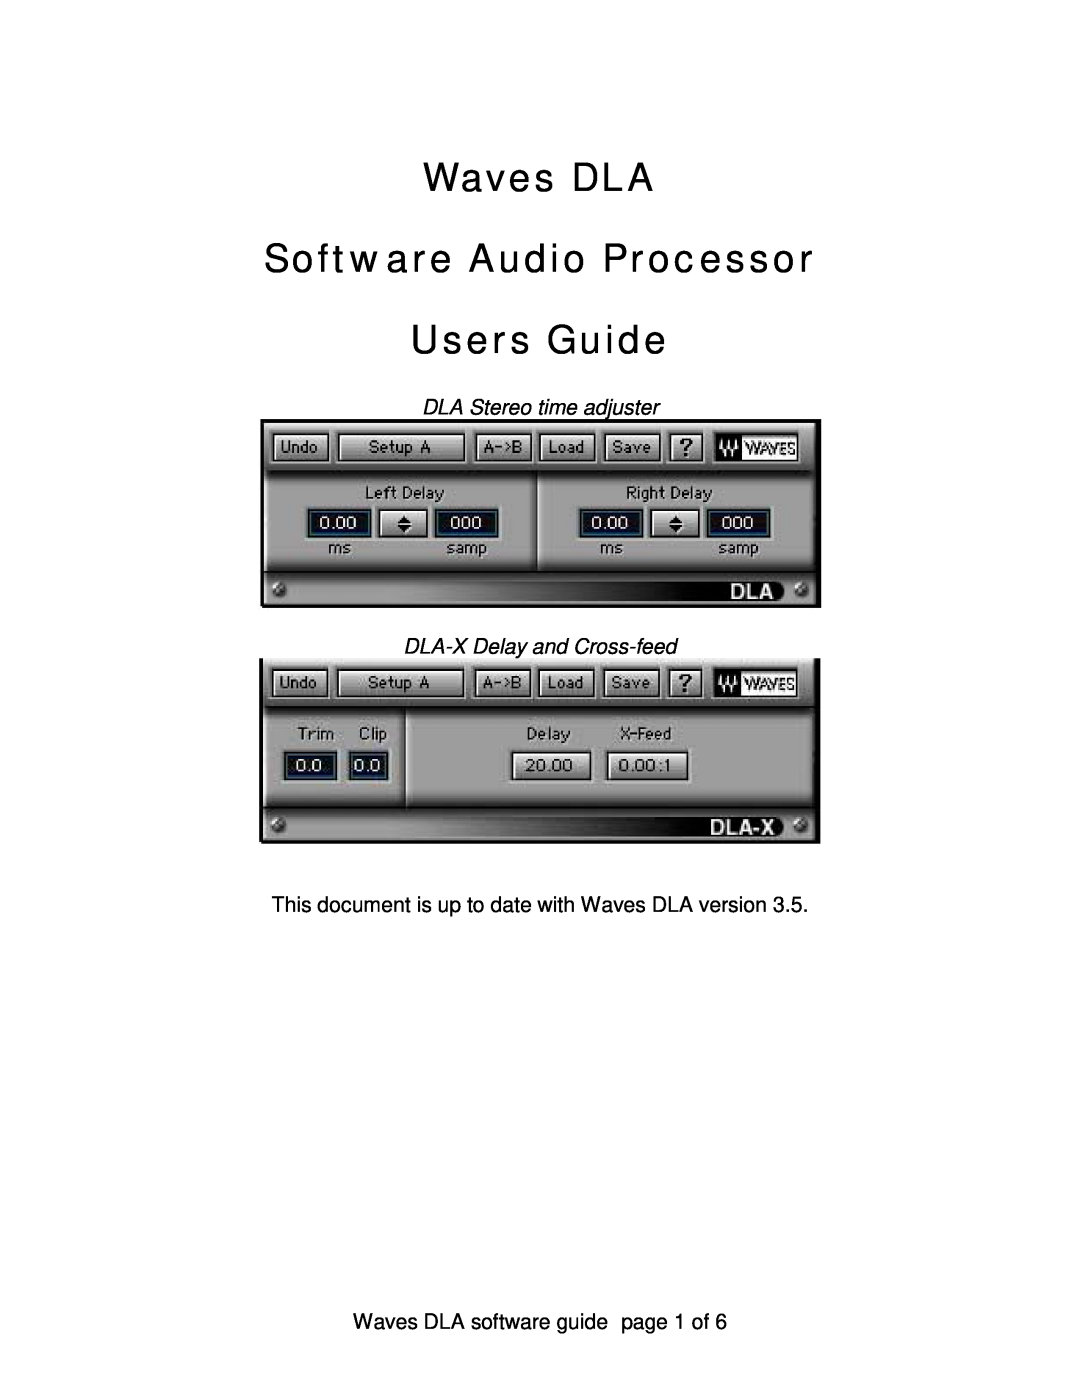 Waves manual Waves DLA Software Audio Processor Users Guide, DLA Stereo time adjuster DLA-X Delay and Cross-feed 